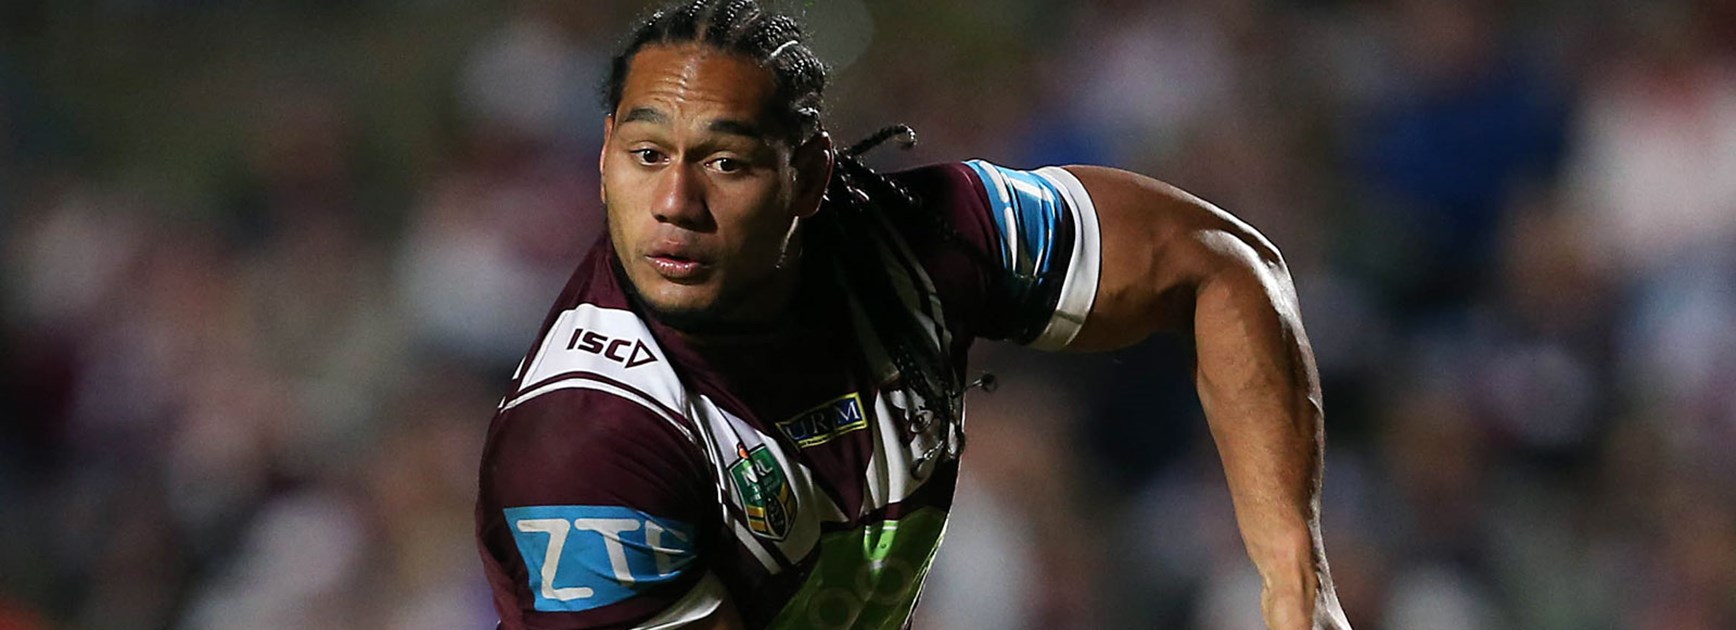 Martin Taupau hopes to put personal battles behind him as he faces the Burgess brothers on Monday night.